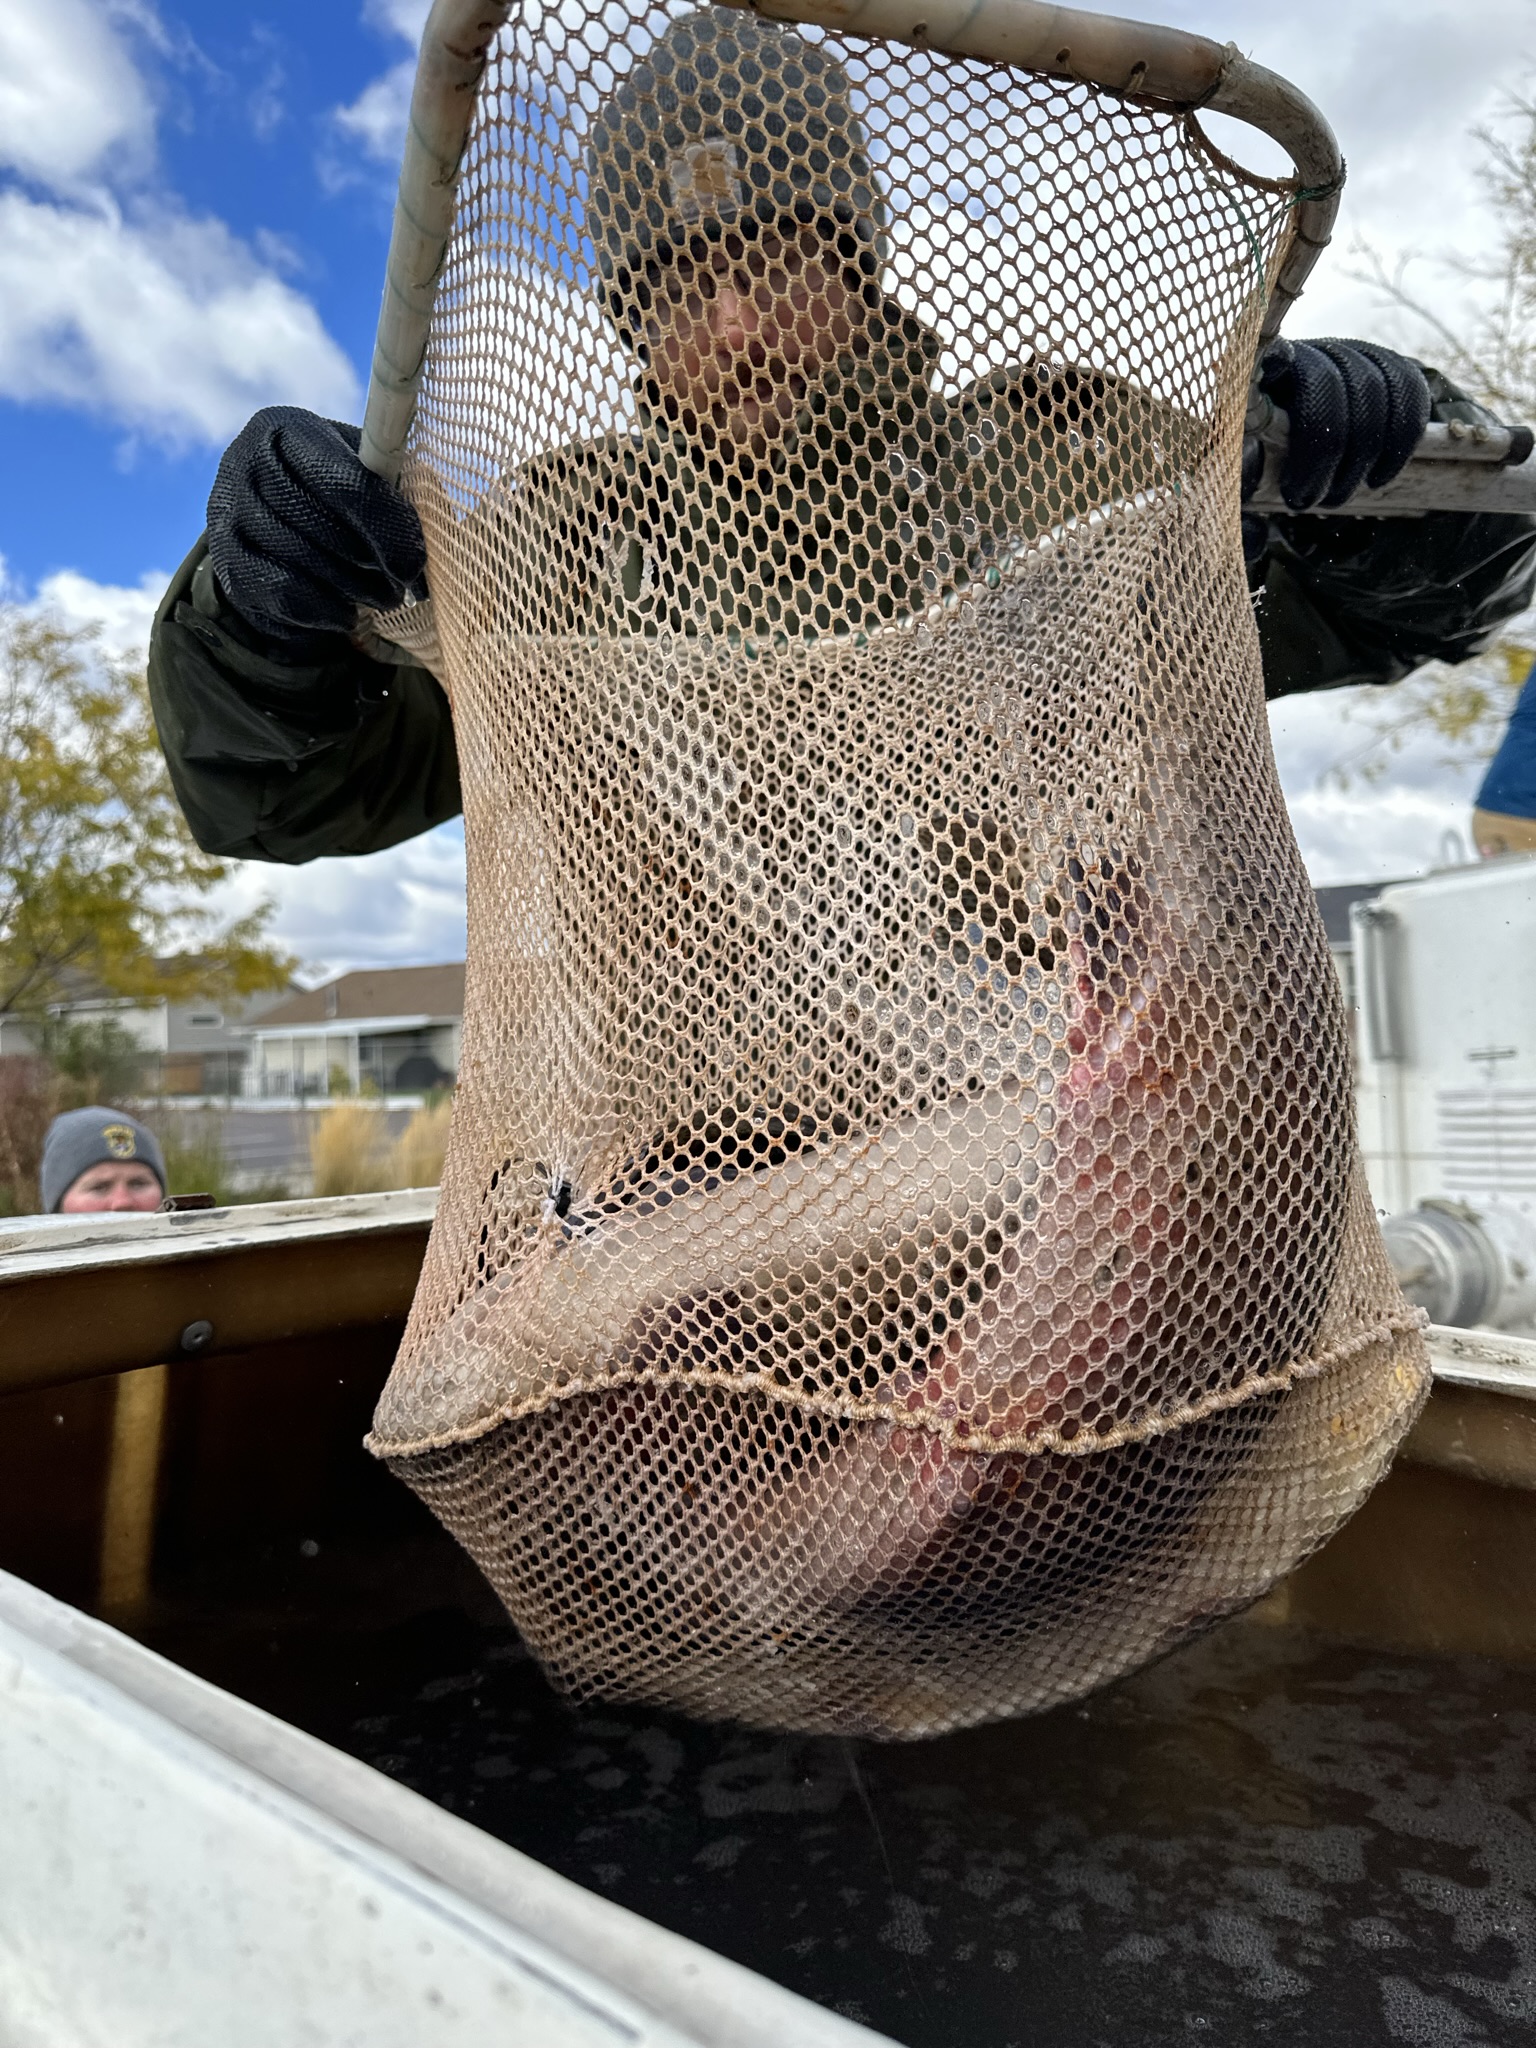 A man wearing an Idaho Fish and Game hat and coat is transferring a netful of large rainbow trout to a small water tank on a transport truck.